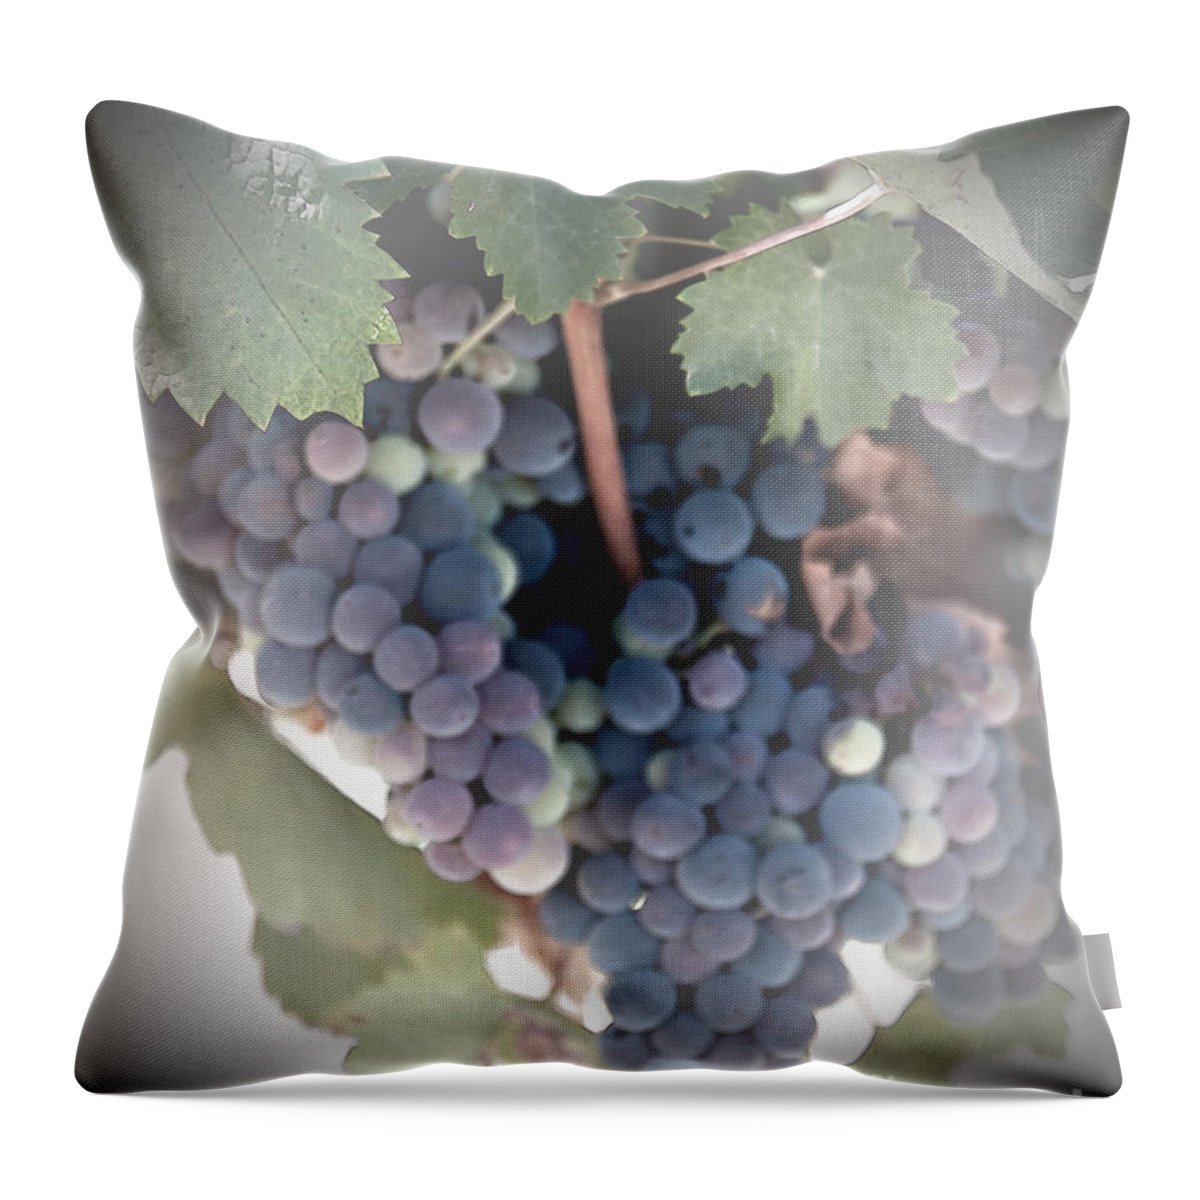 Grapes Throw Pillow featuring the digital art Grapes on the Vine I by Sherry Hallemeier